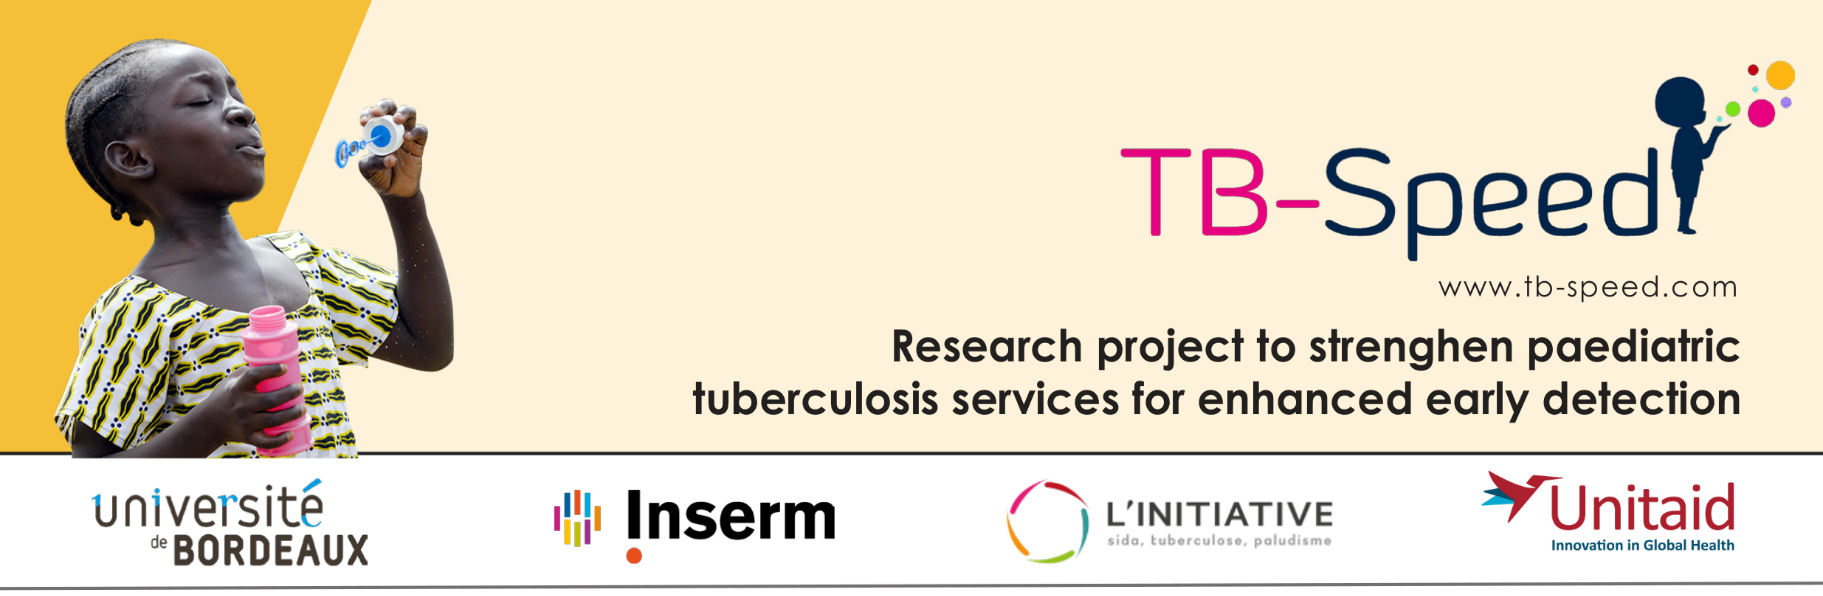 TB-Speed Project. International Symposium for the Restitution of Results